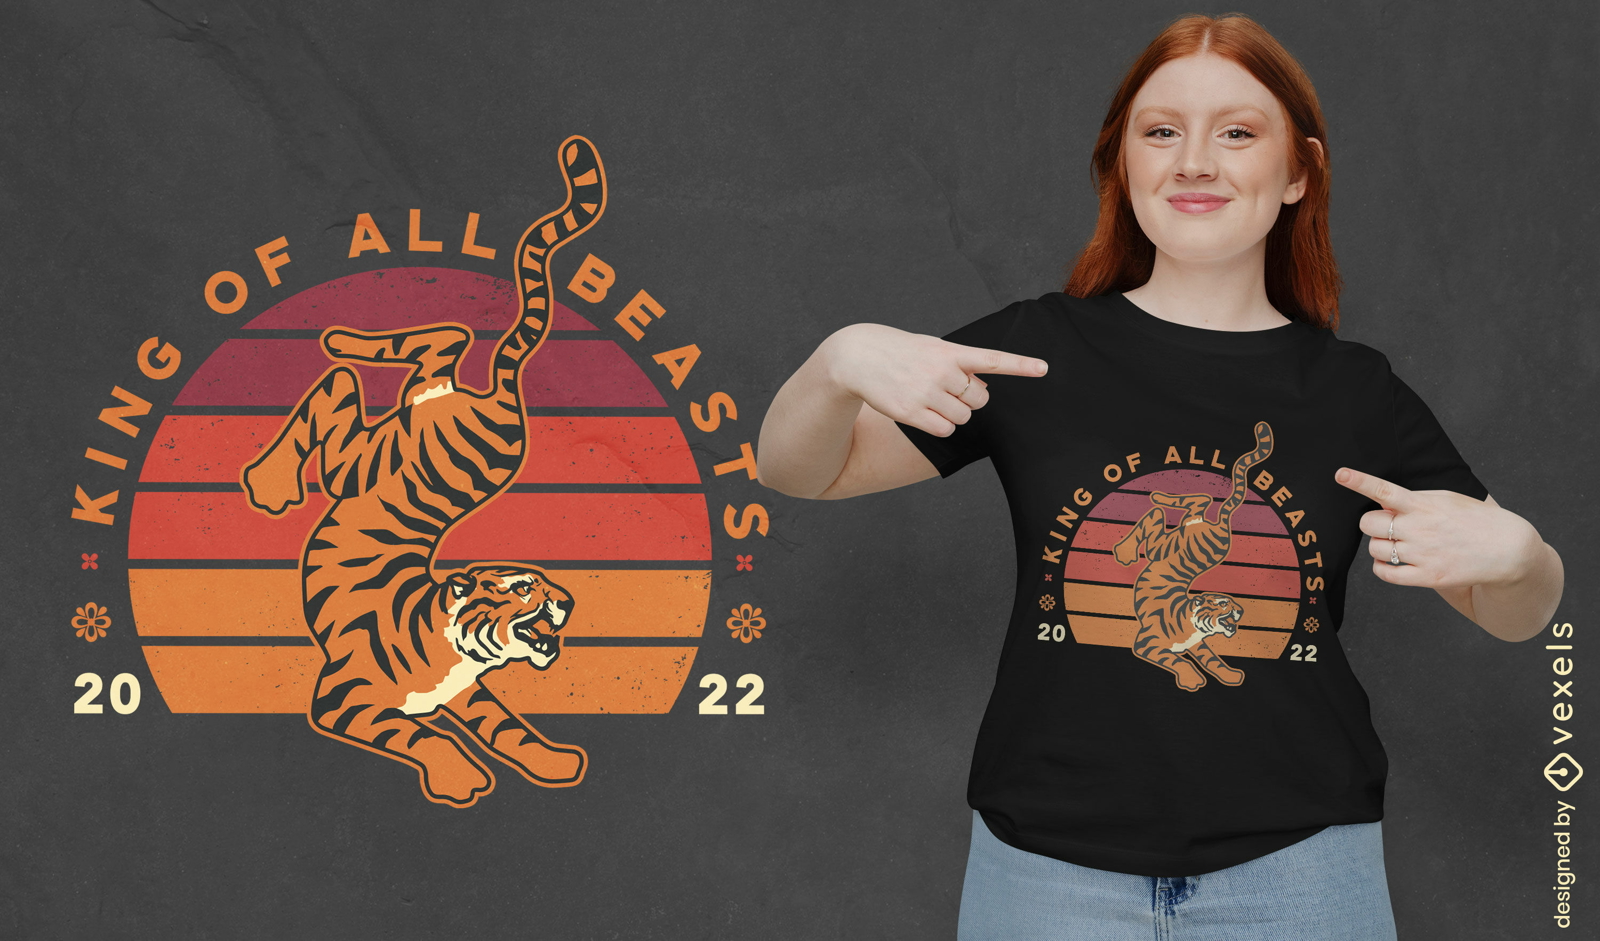 Chinese new year tiger in retro sunset t-shirt design